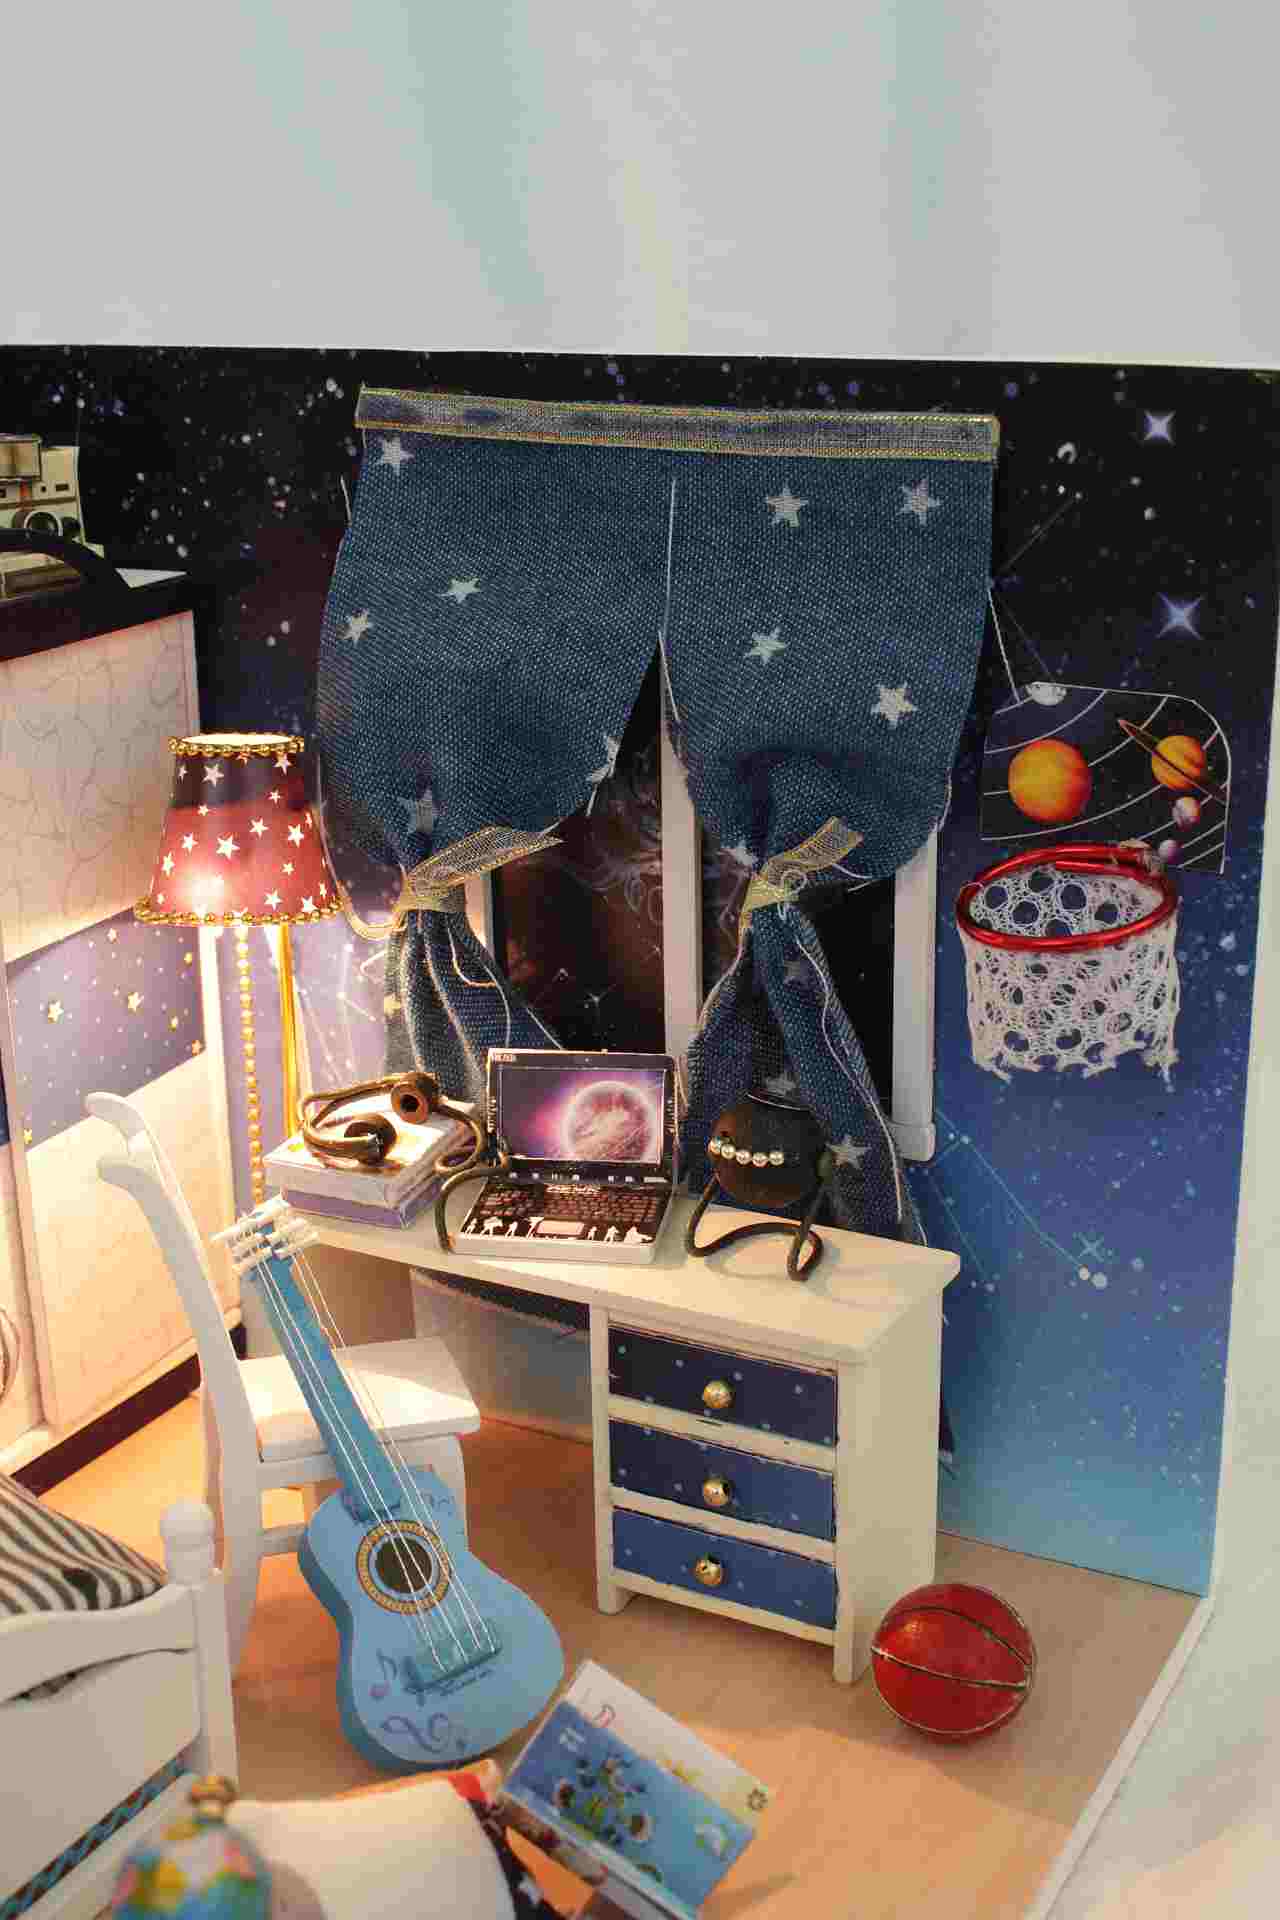 Wooden Miniature Dollhouse Furniture Kits 'Take You to See the Stars' w/LEDs, Dust Proof Cover and Glue Handmade Gifts Craft Presents